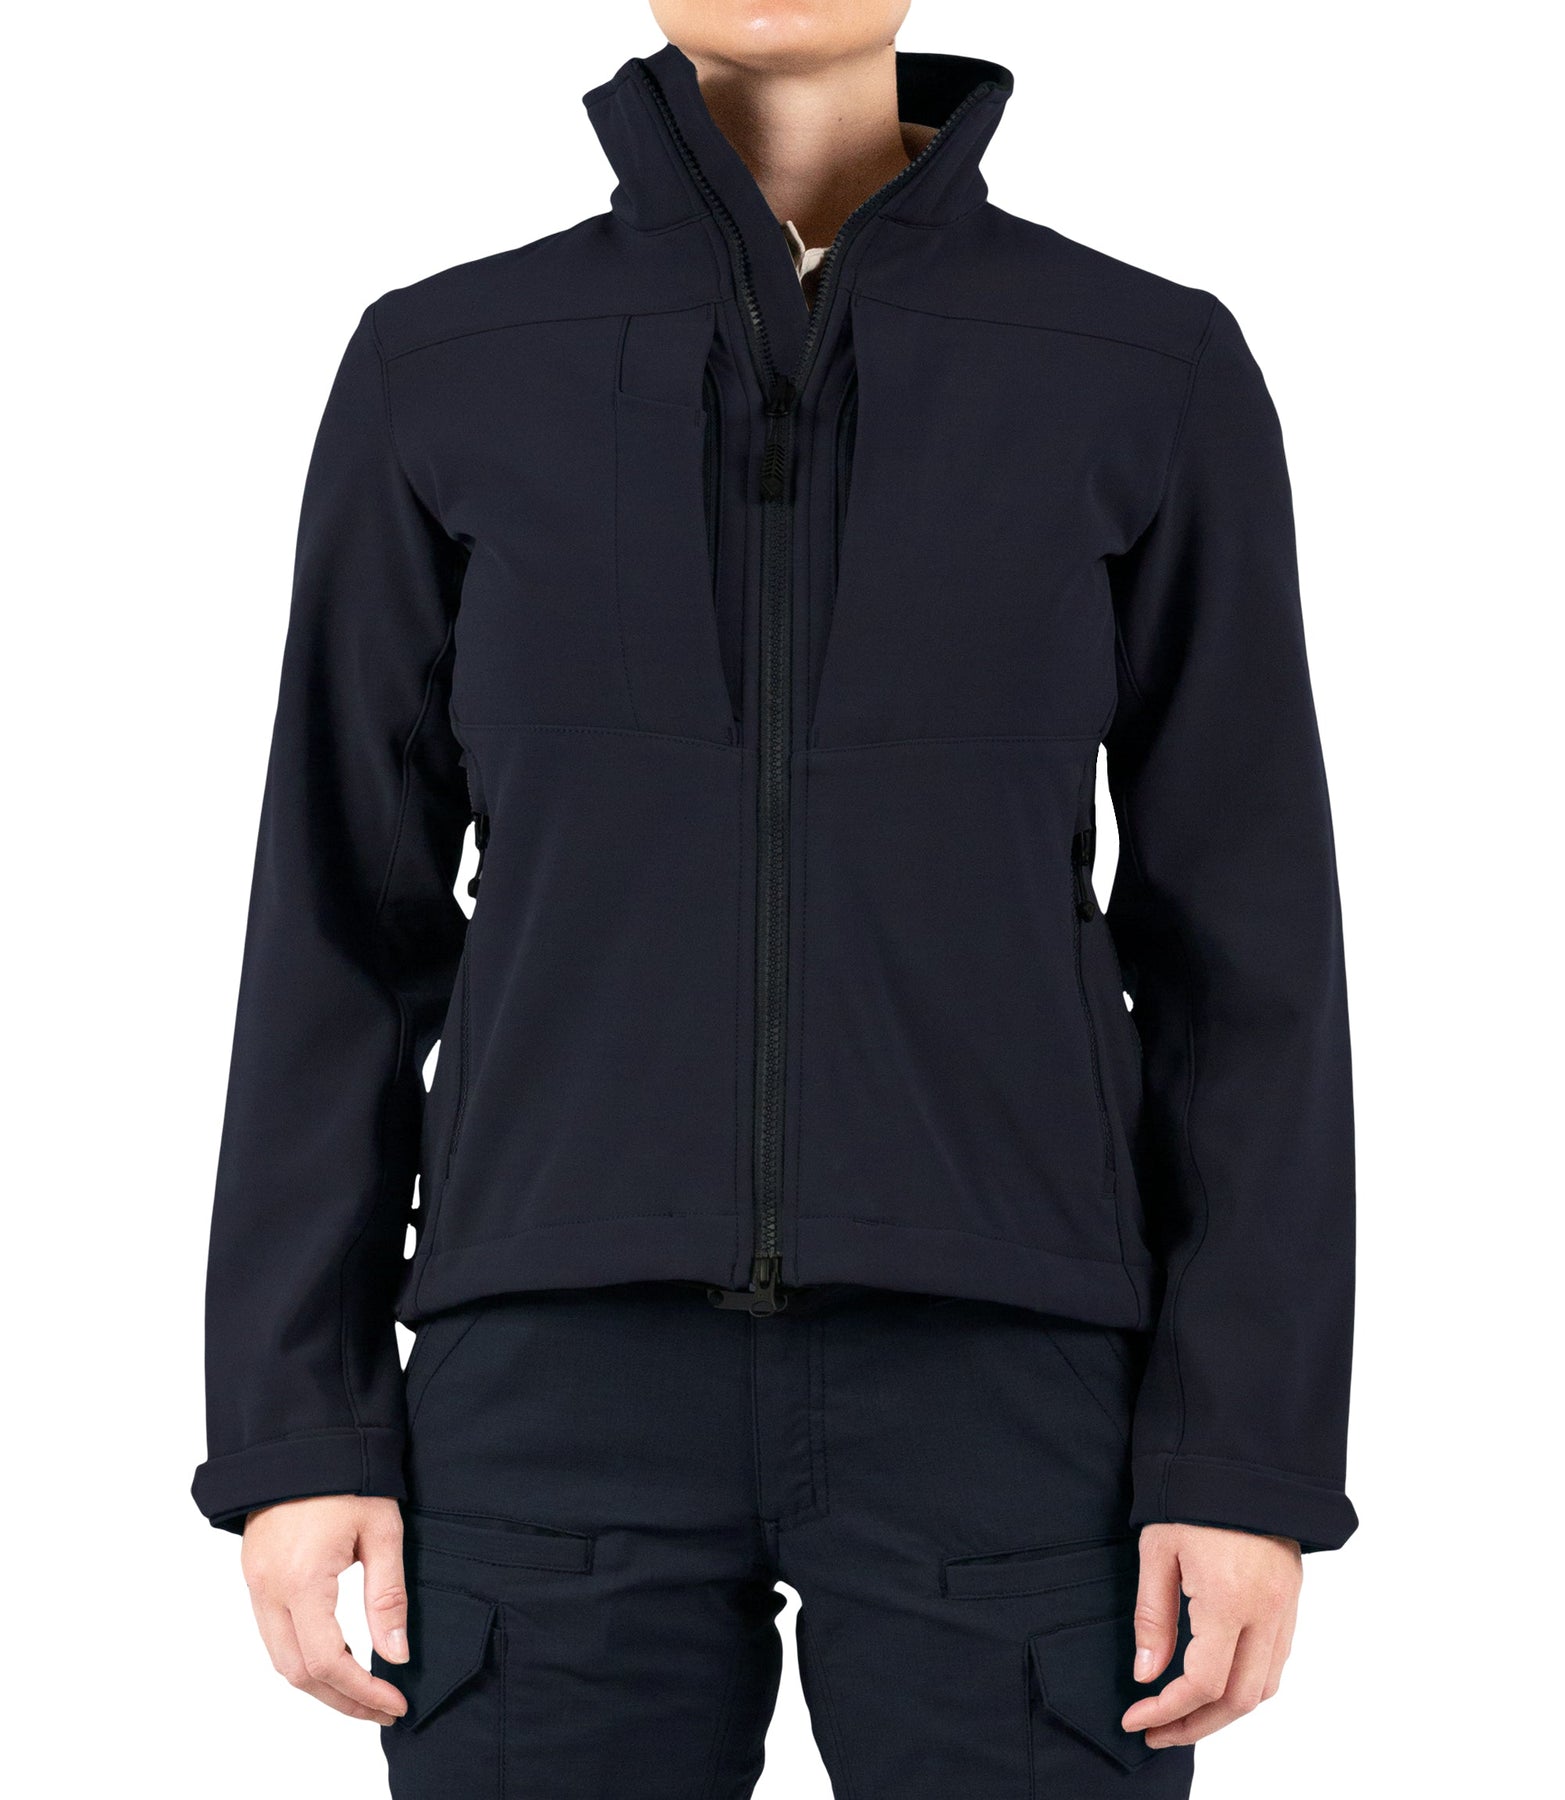 Women’s Tactix Softshell Jacket – First Tactical